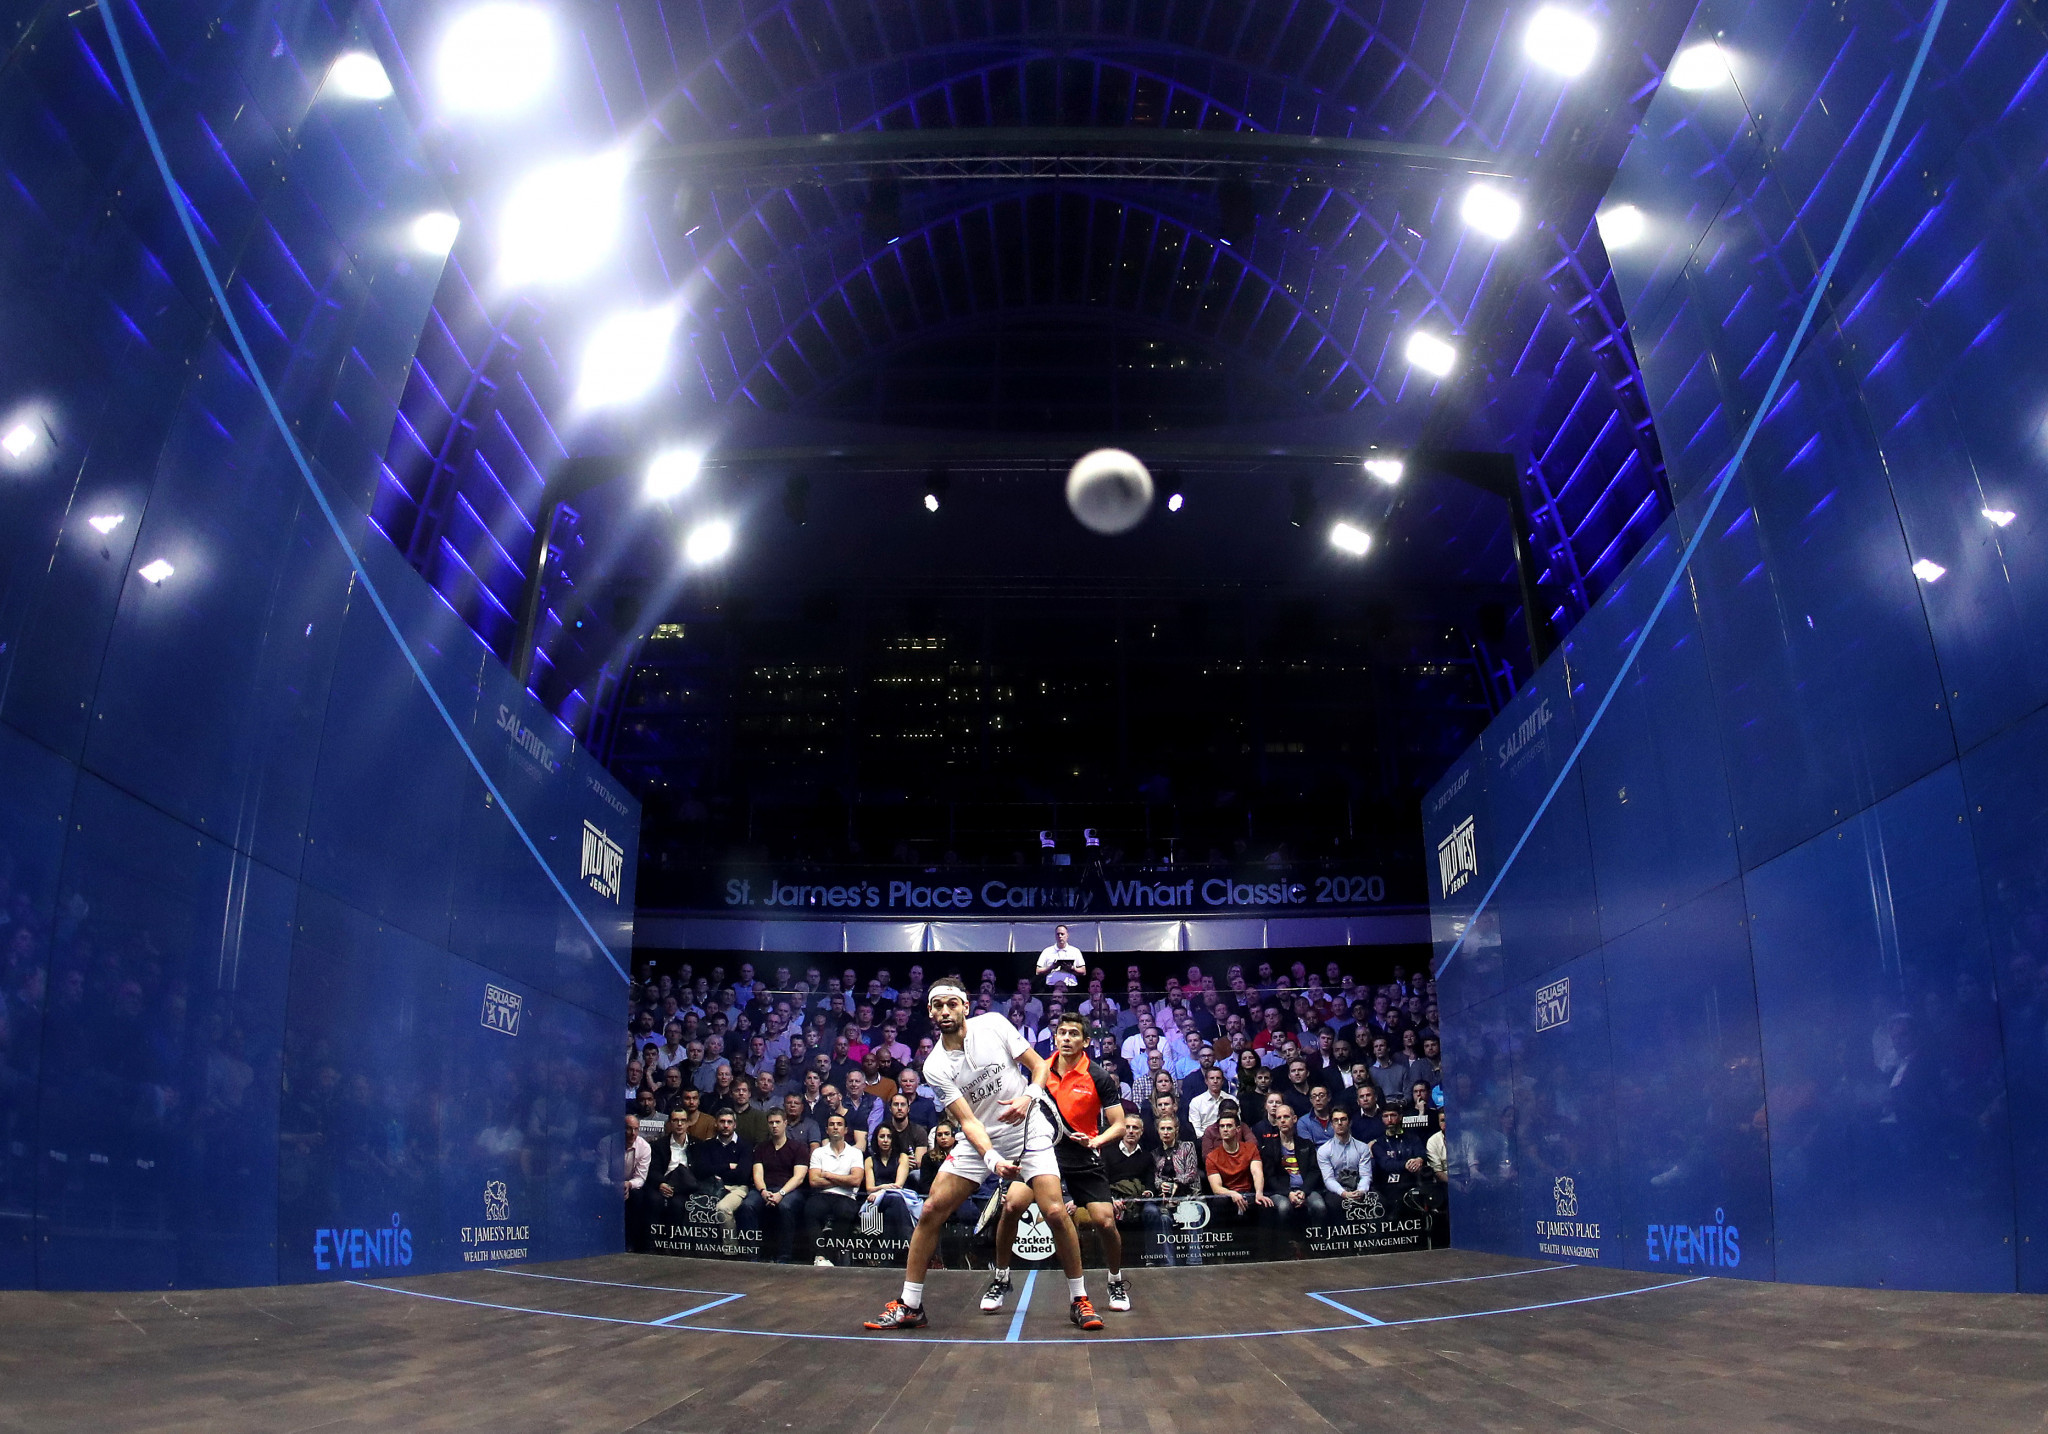 Like all sports, squash has faced severe disruption due to the COVID-19 pandemic ©Getty Images